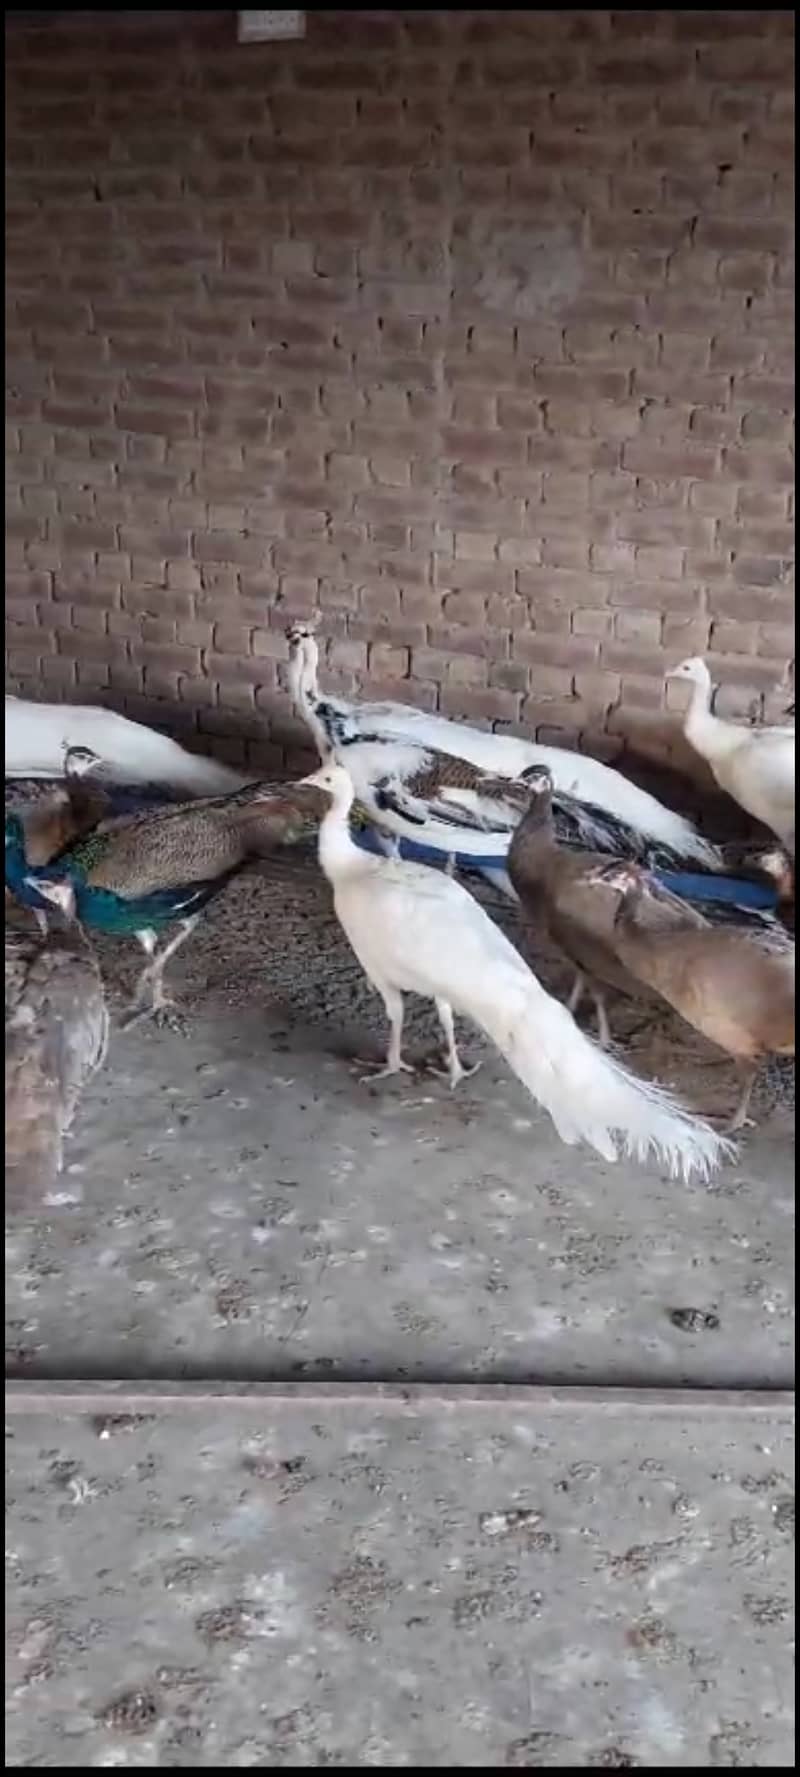 peacocks 1 year 4 years available. cargo possible. contact WhatsApp 7